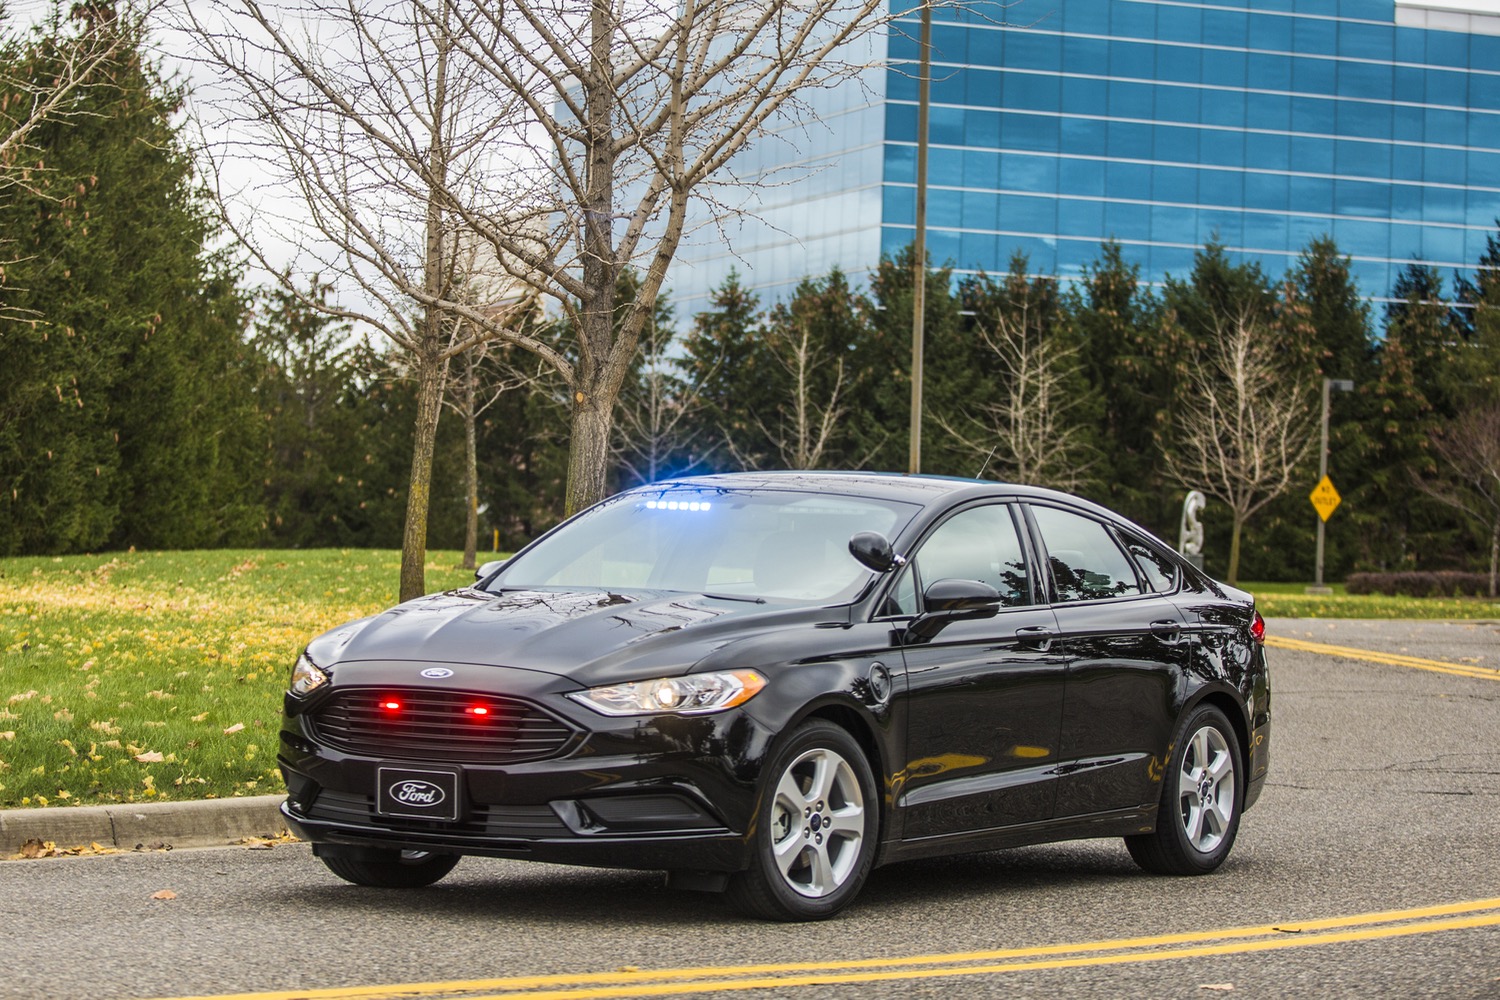 Ford Fusion Energi Police Car, Photos, Details, And Specs